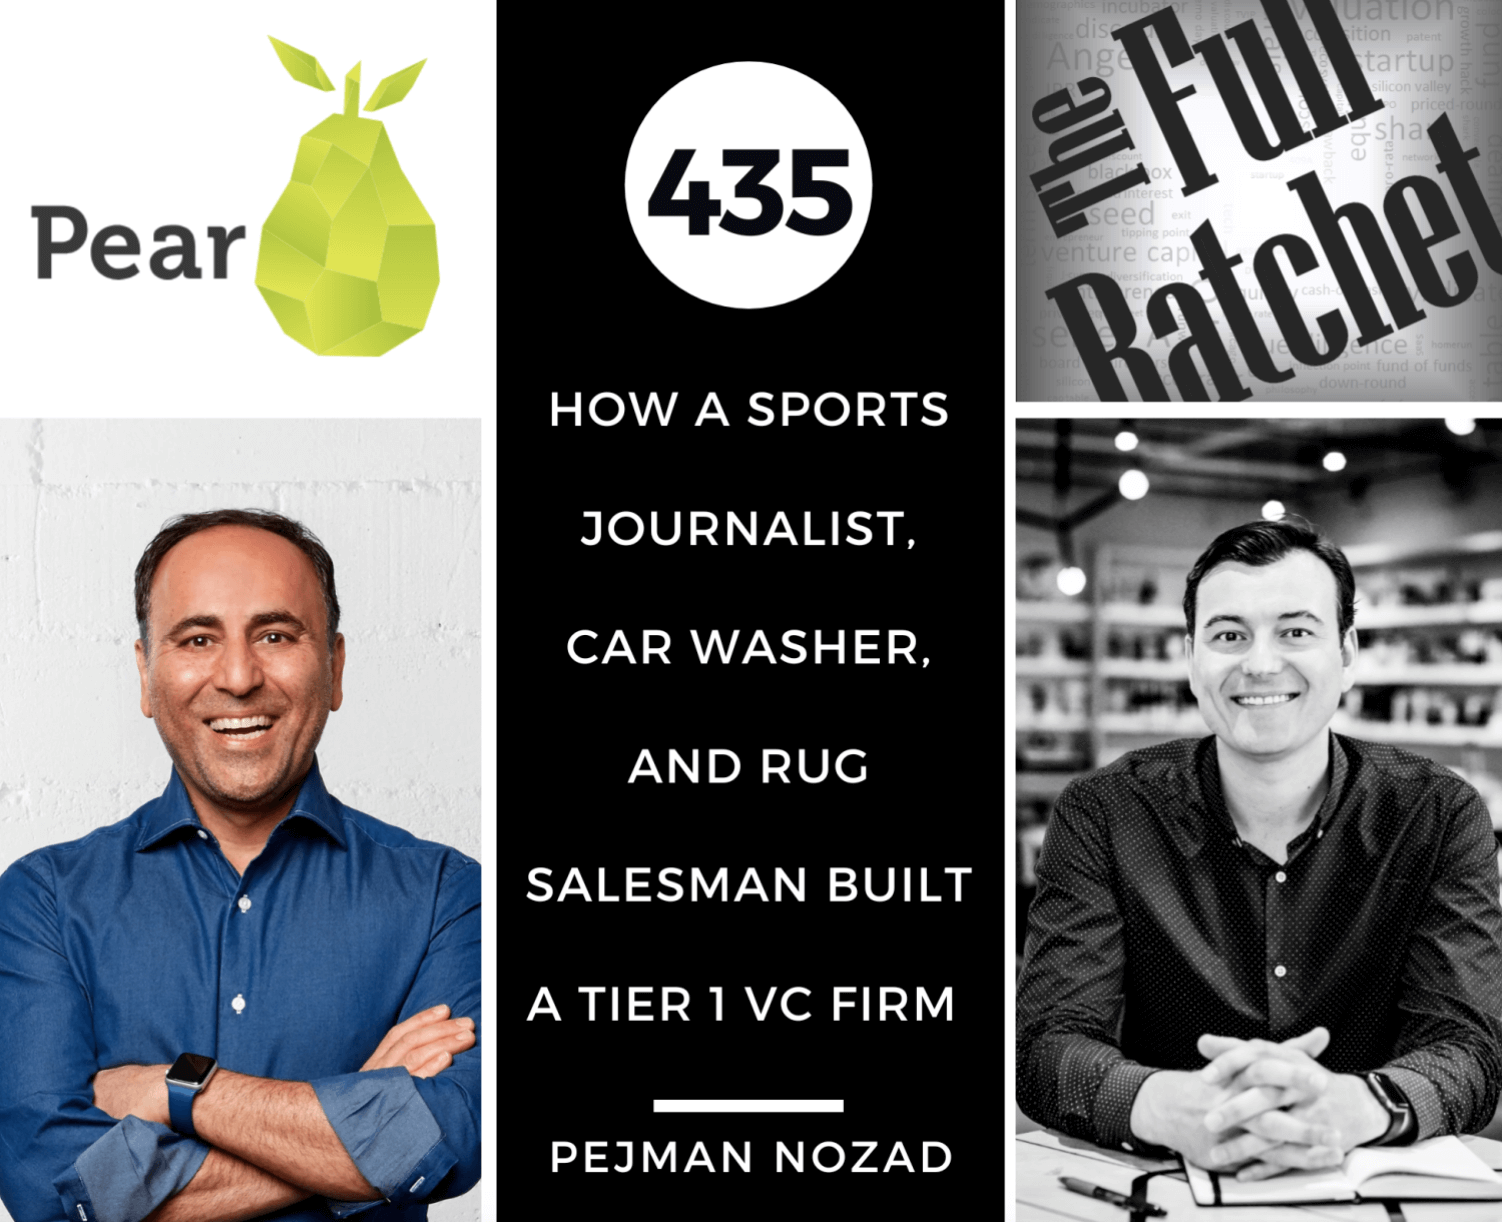 The Full Ratchet podcast: How a Sports Journalist, Car Washer, and Rug Salesman Built a Tier 1 VC Firm (Pejman Nozad)